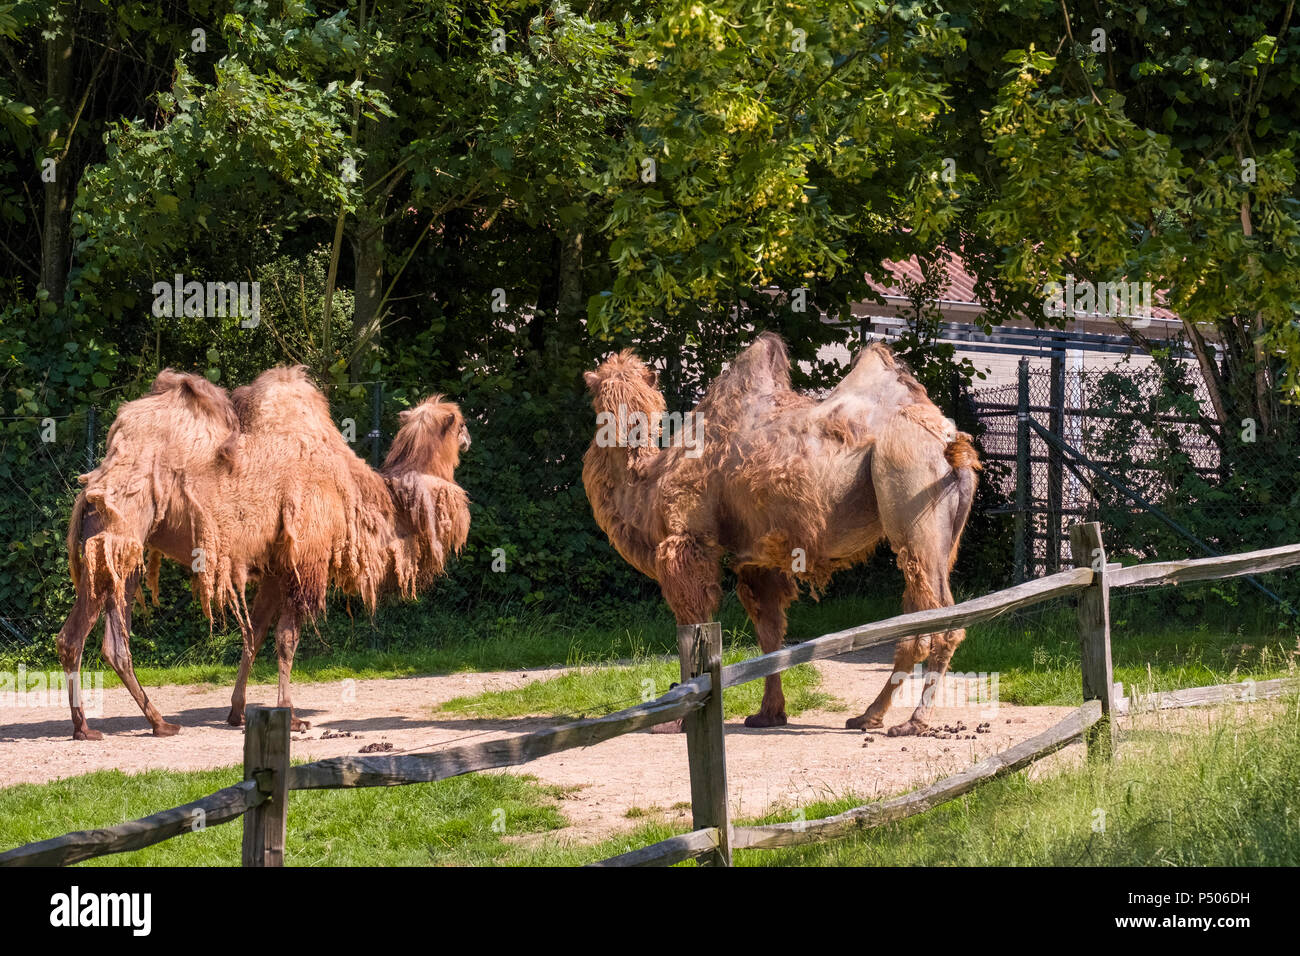 Two humped camelsat the zoo park Gaia, Kerkrade, Netherlands. Stock Photo